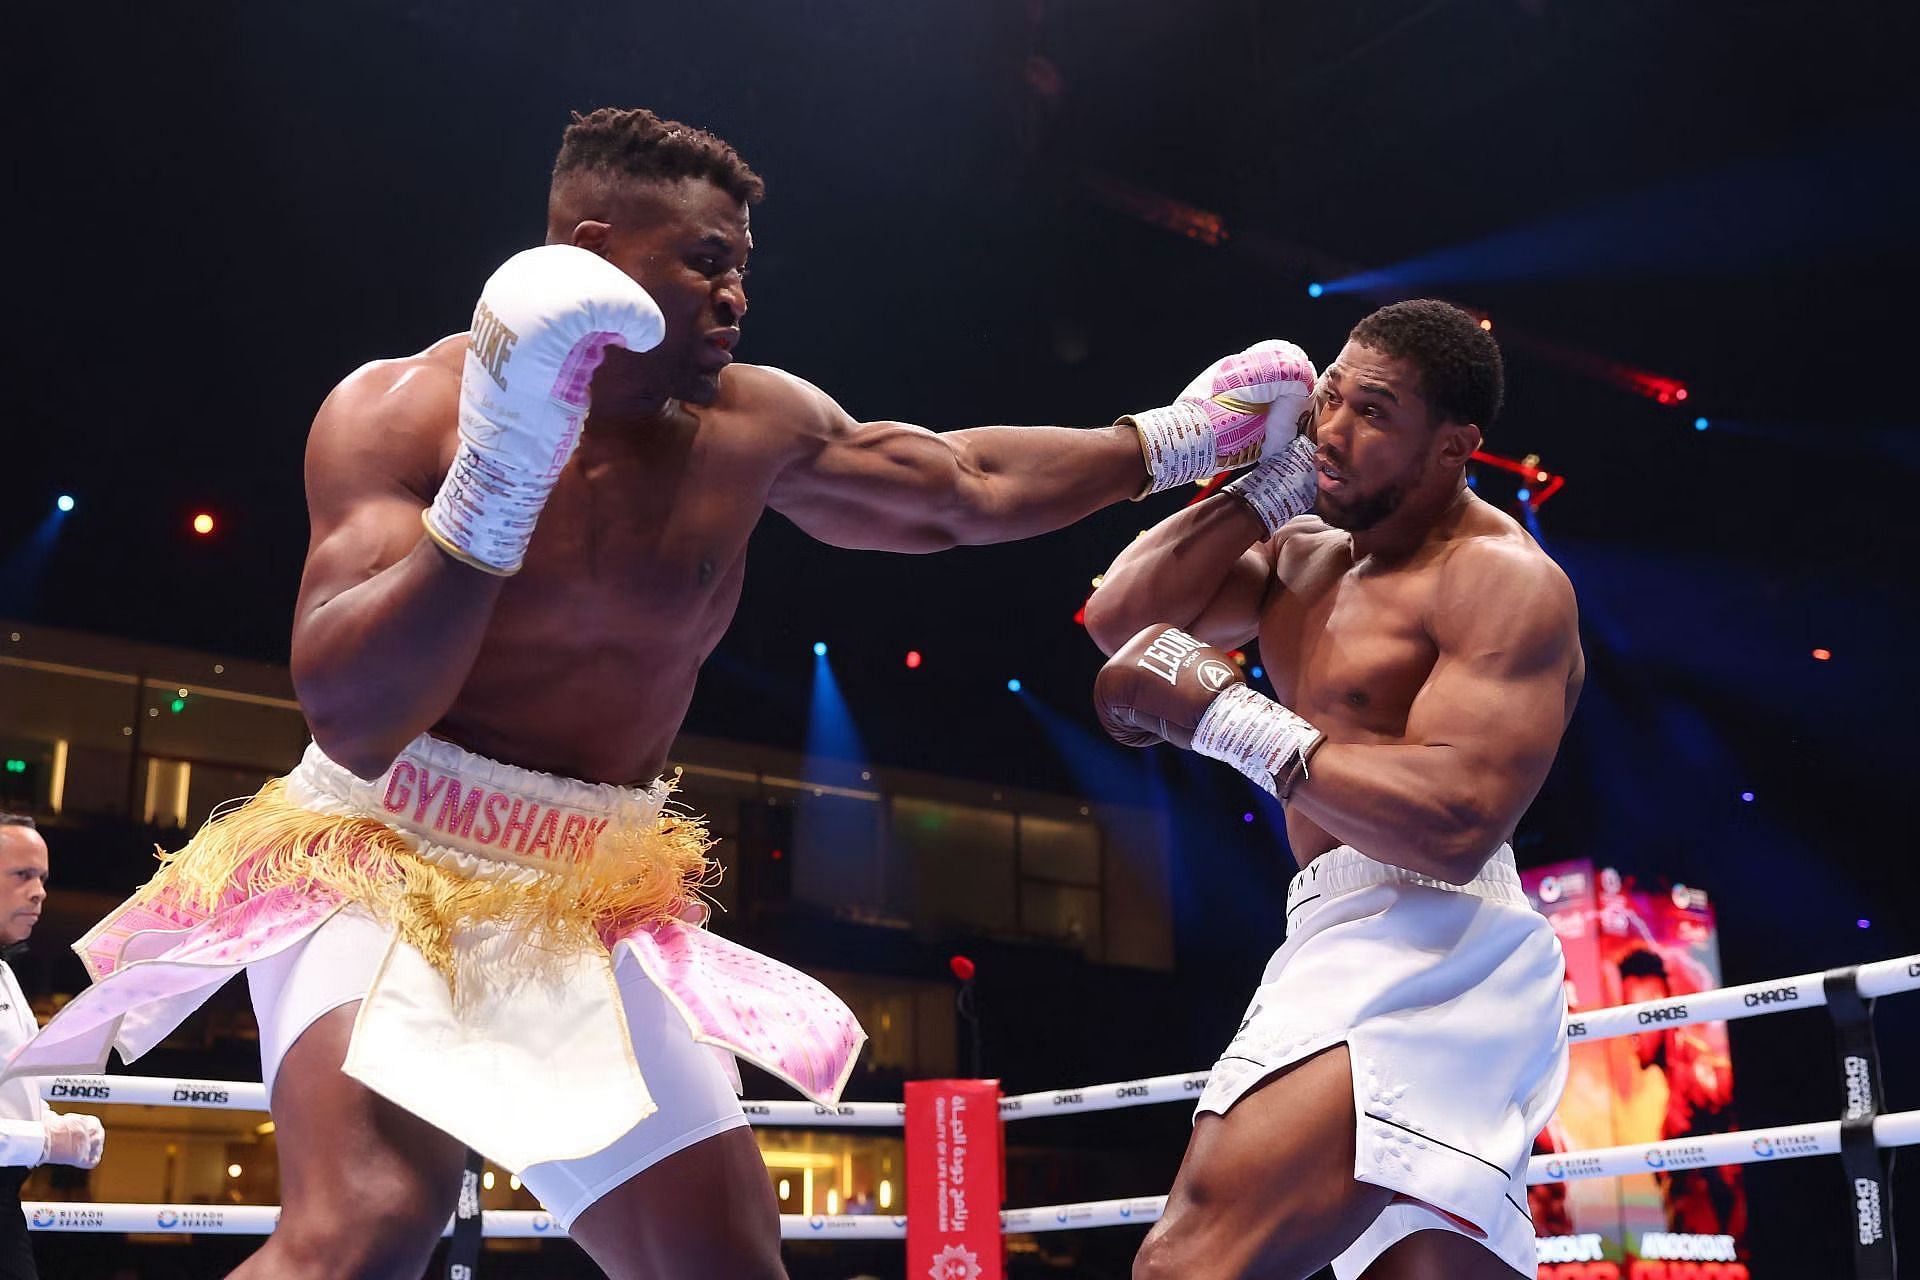 Francis Ngannou vs. Anthony Joshua took place on March 8 [Image via Getty]